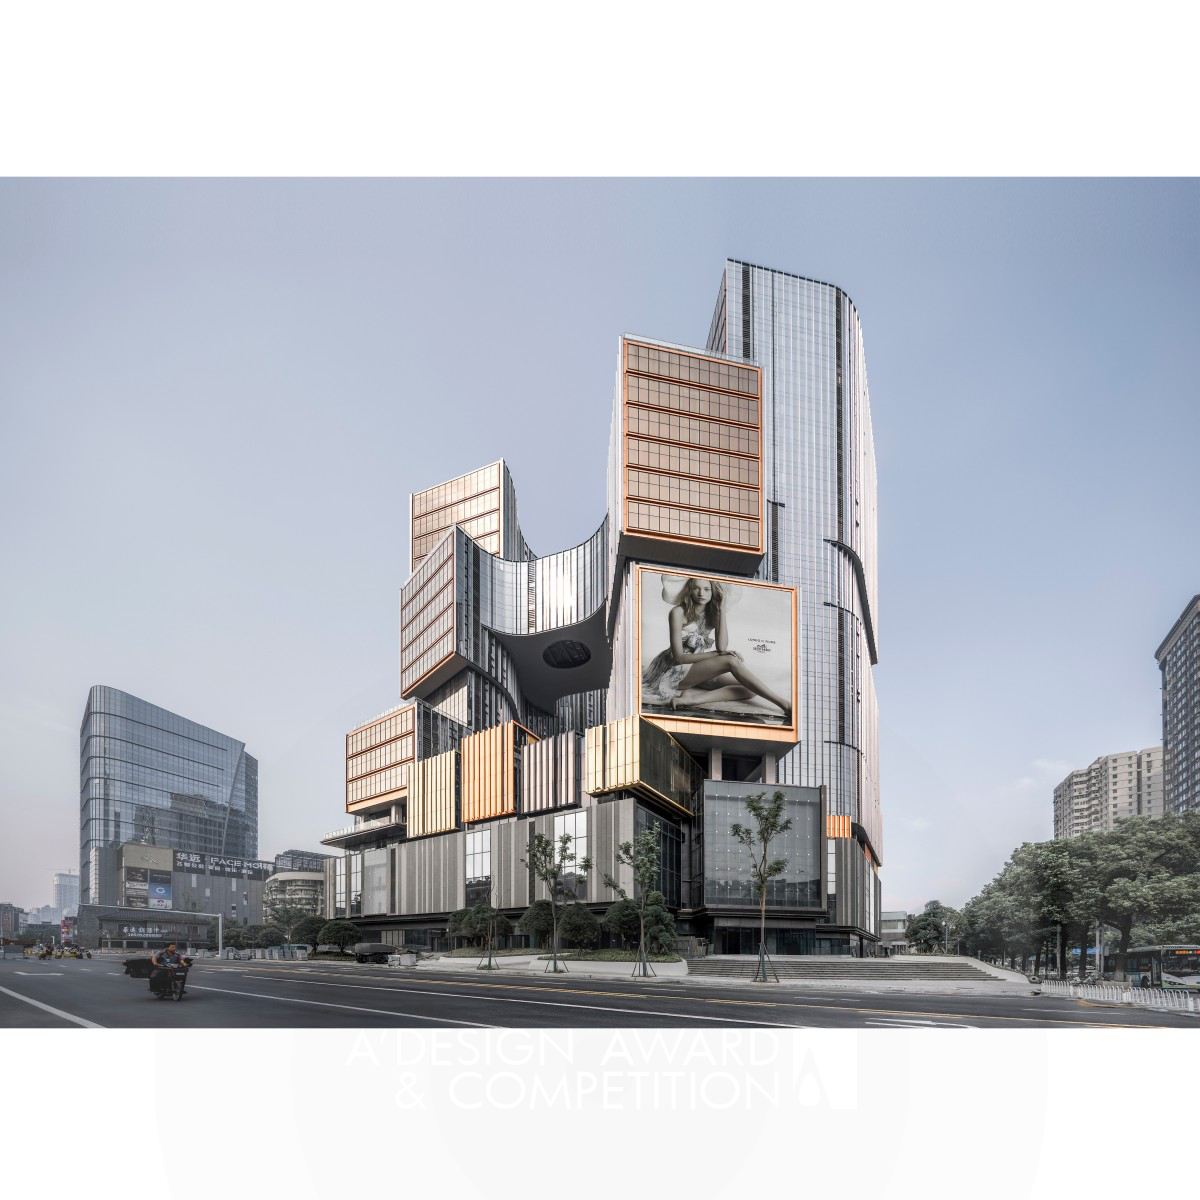 Changsha Hua Center Phase II Project Soho Office and Retail by Aedas Silver Architecture, Building and Structure Design Award Winner 2020 